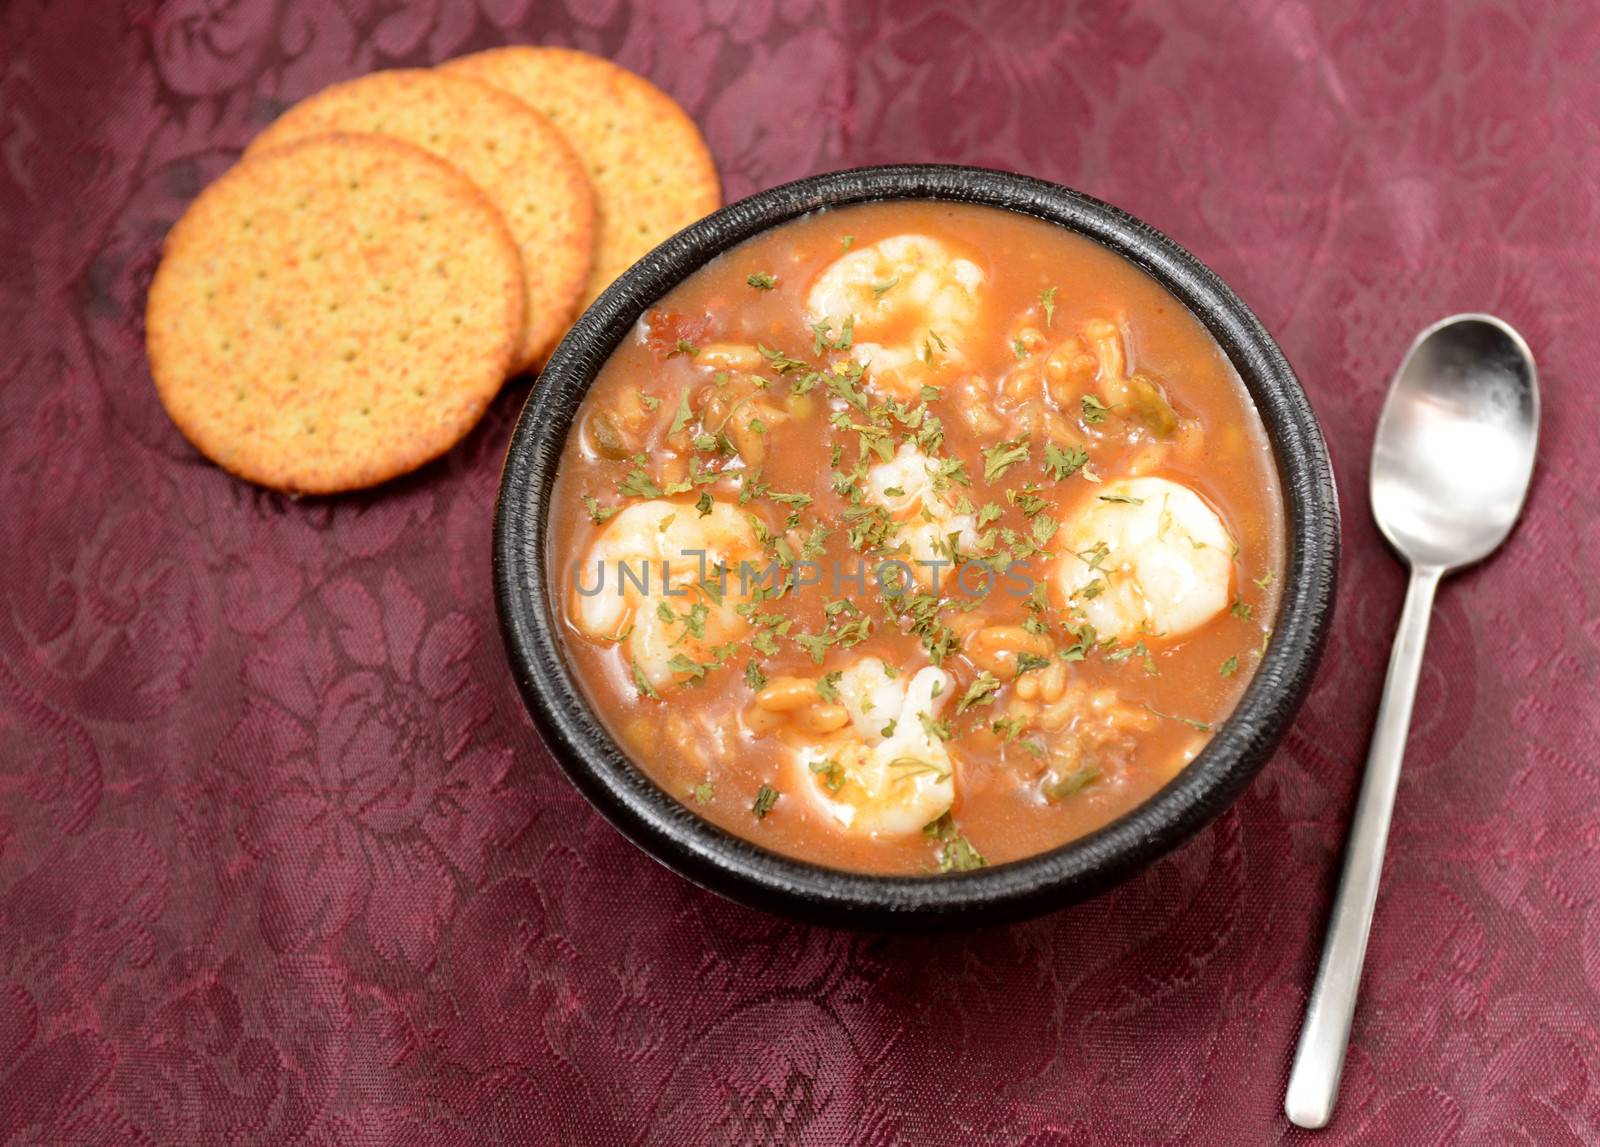 creole shrimp gumbo with crackers at a restaurant